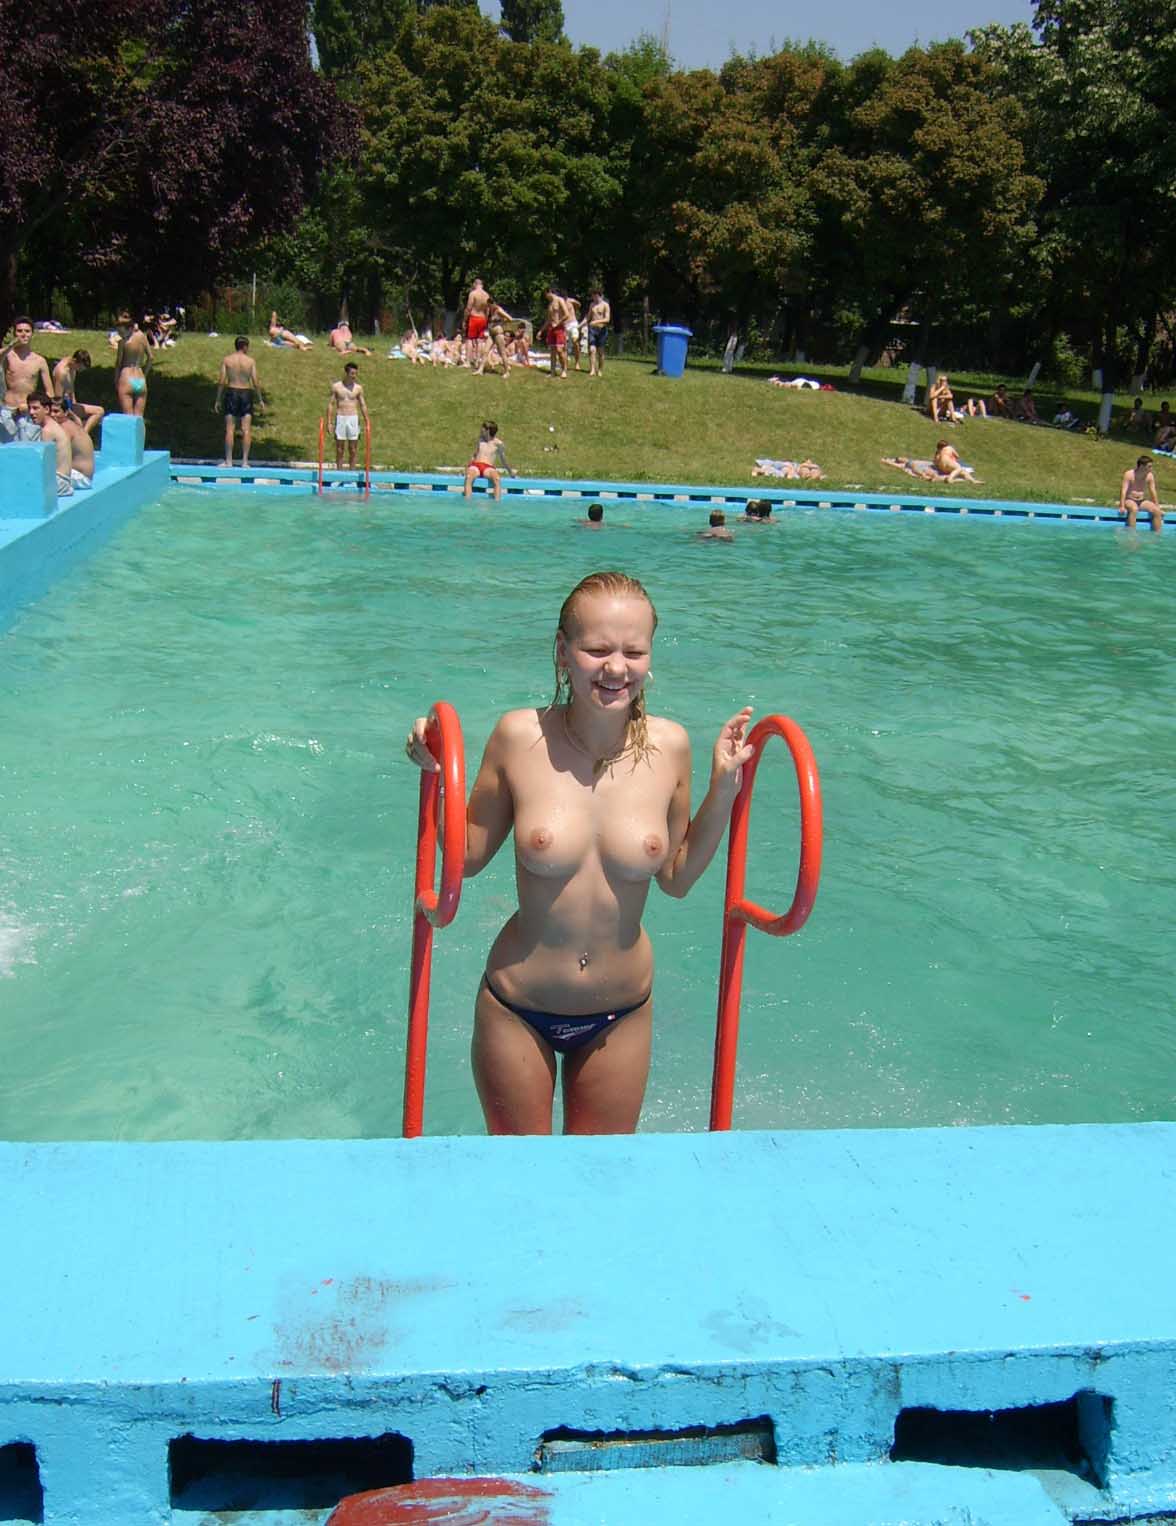 Public pool topless picture